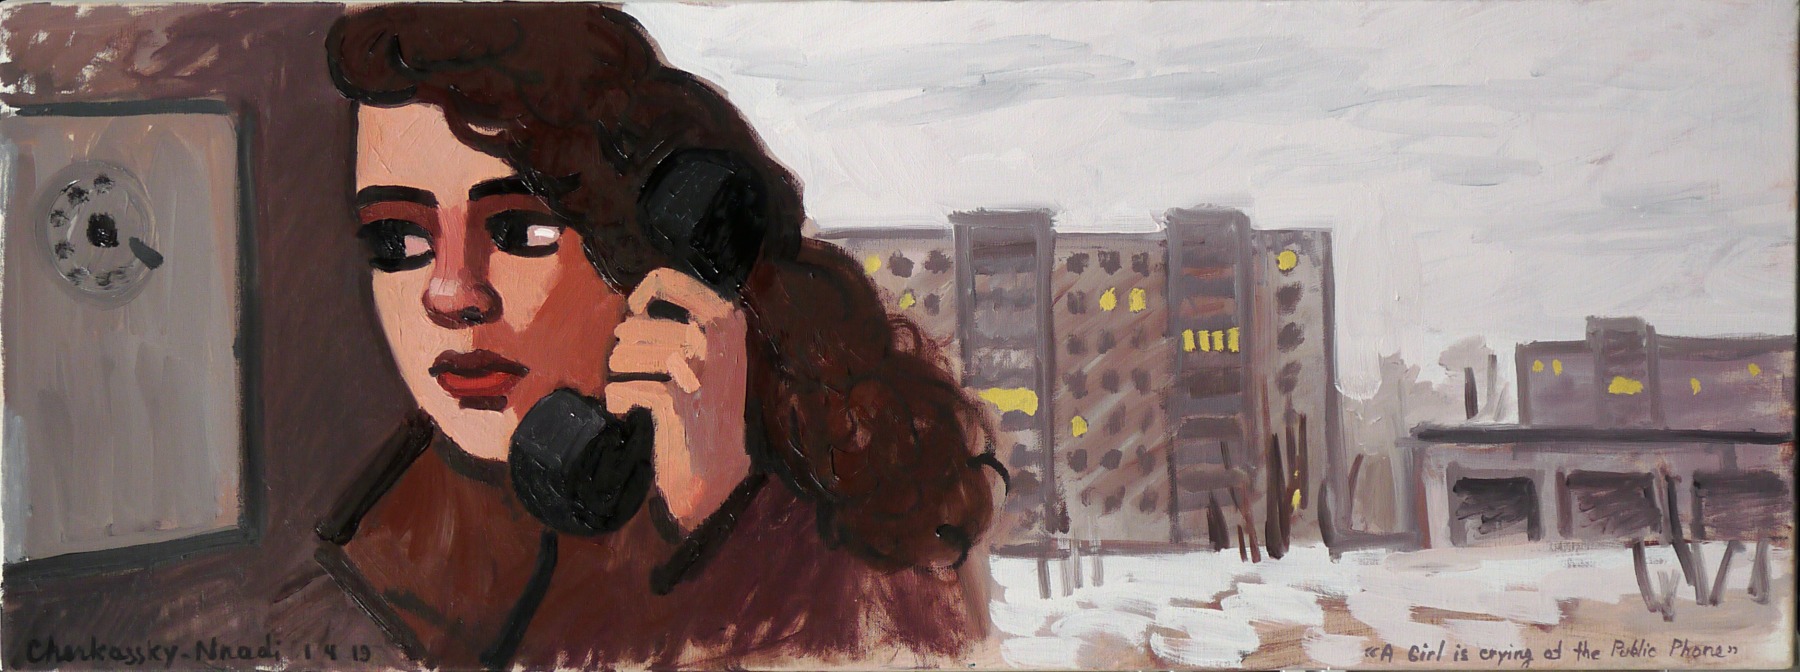 A Girl is Crying at Public Phone, 2019
Oil on linen
12 x 31.5 inches